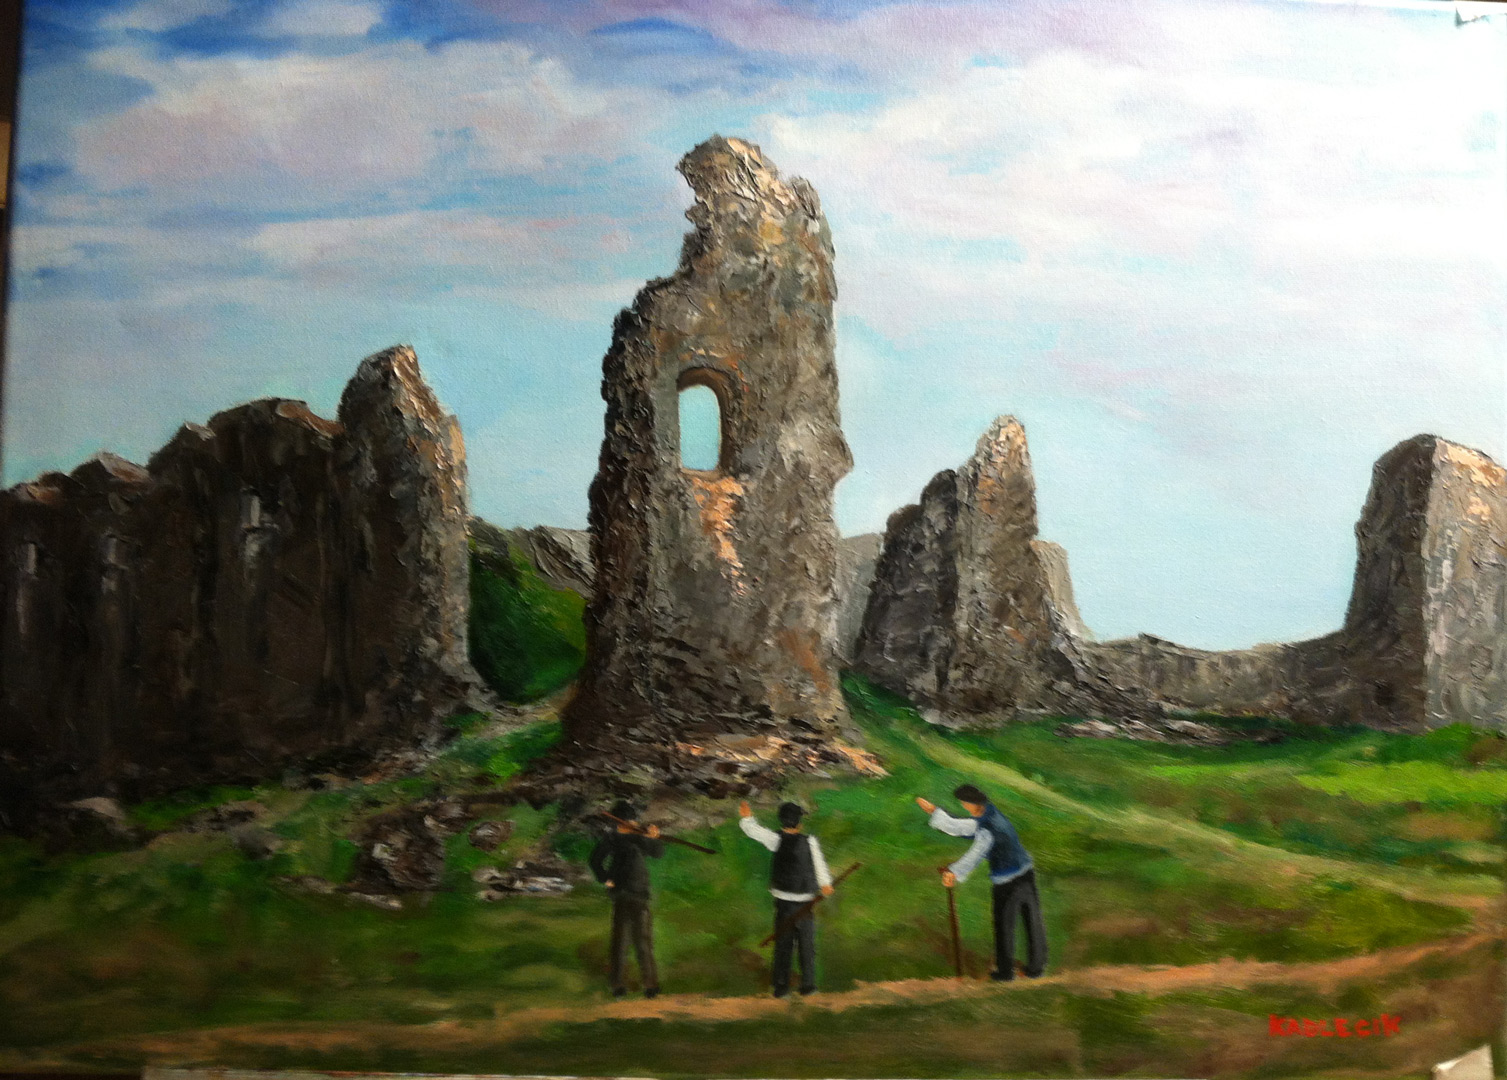 Three men stand on the road and examine ruins on a hill.